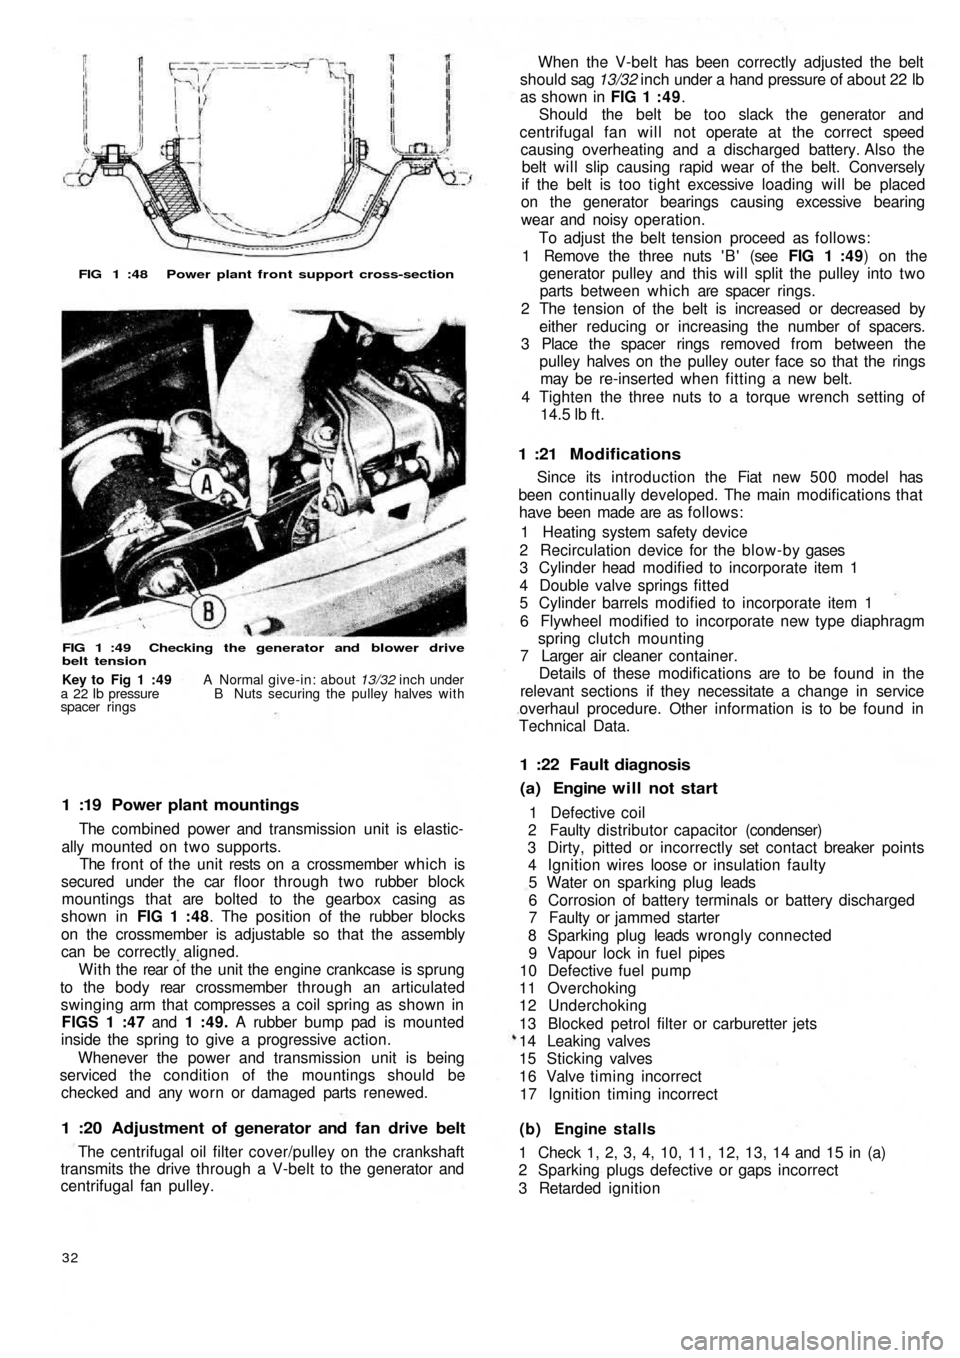 FIAT 500 1964 1.G Workshop Manual FIG 1 :48  Power plant front support cross-section
FIG 1 :49  Checking  the generator and  blower drive
belt tension
1 :19  Power plant mountings
The combined power and transmission unit is elastic-
a